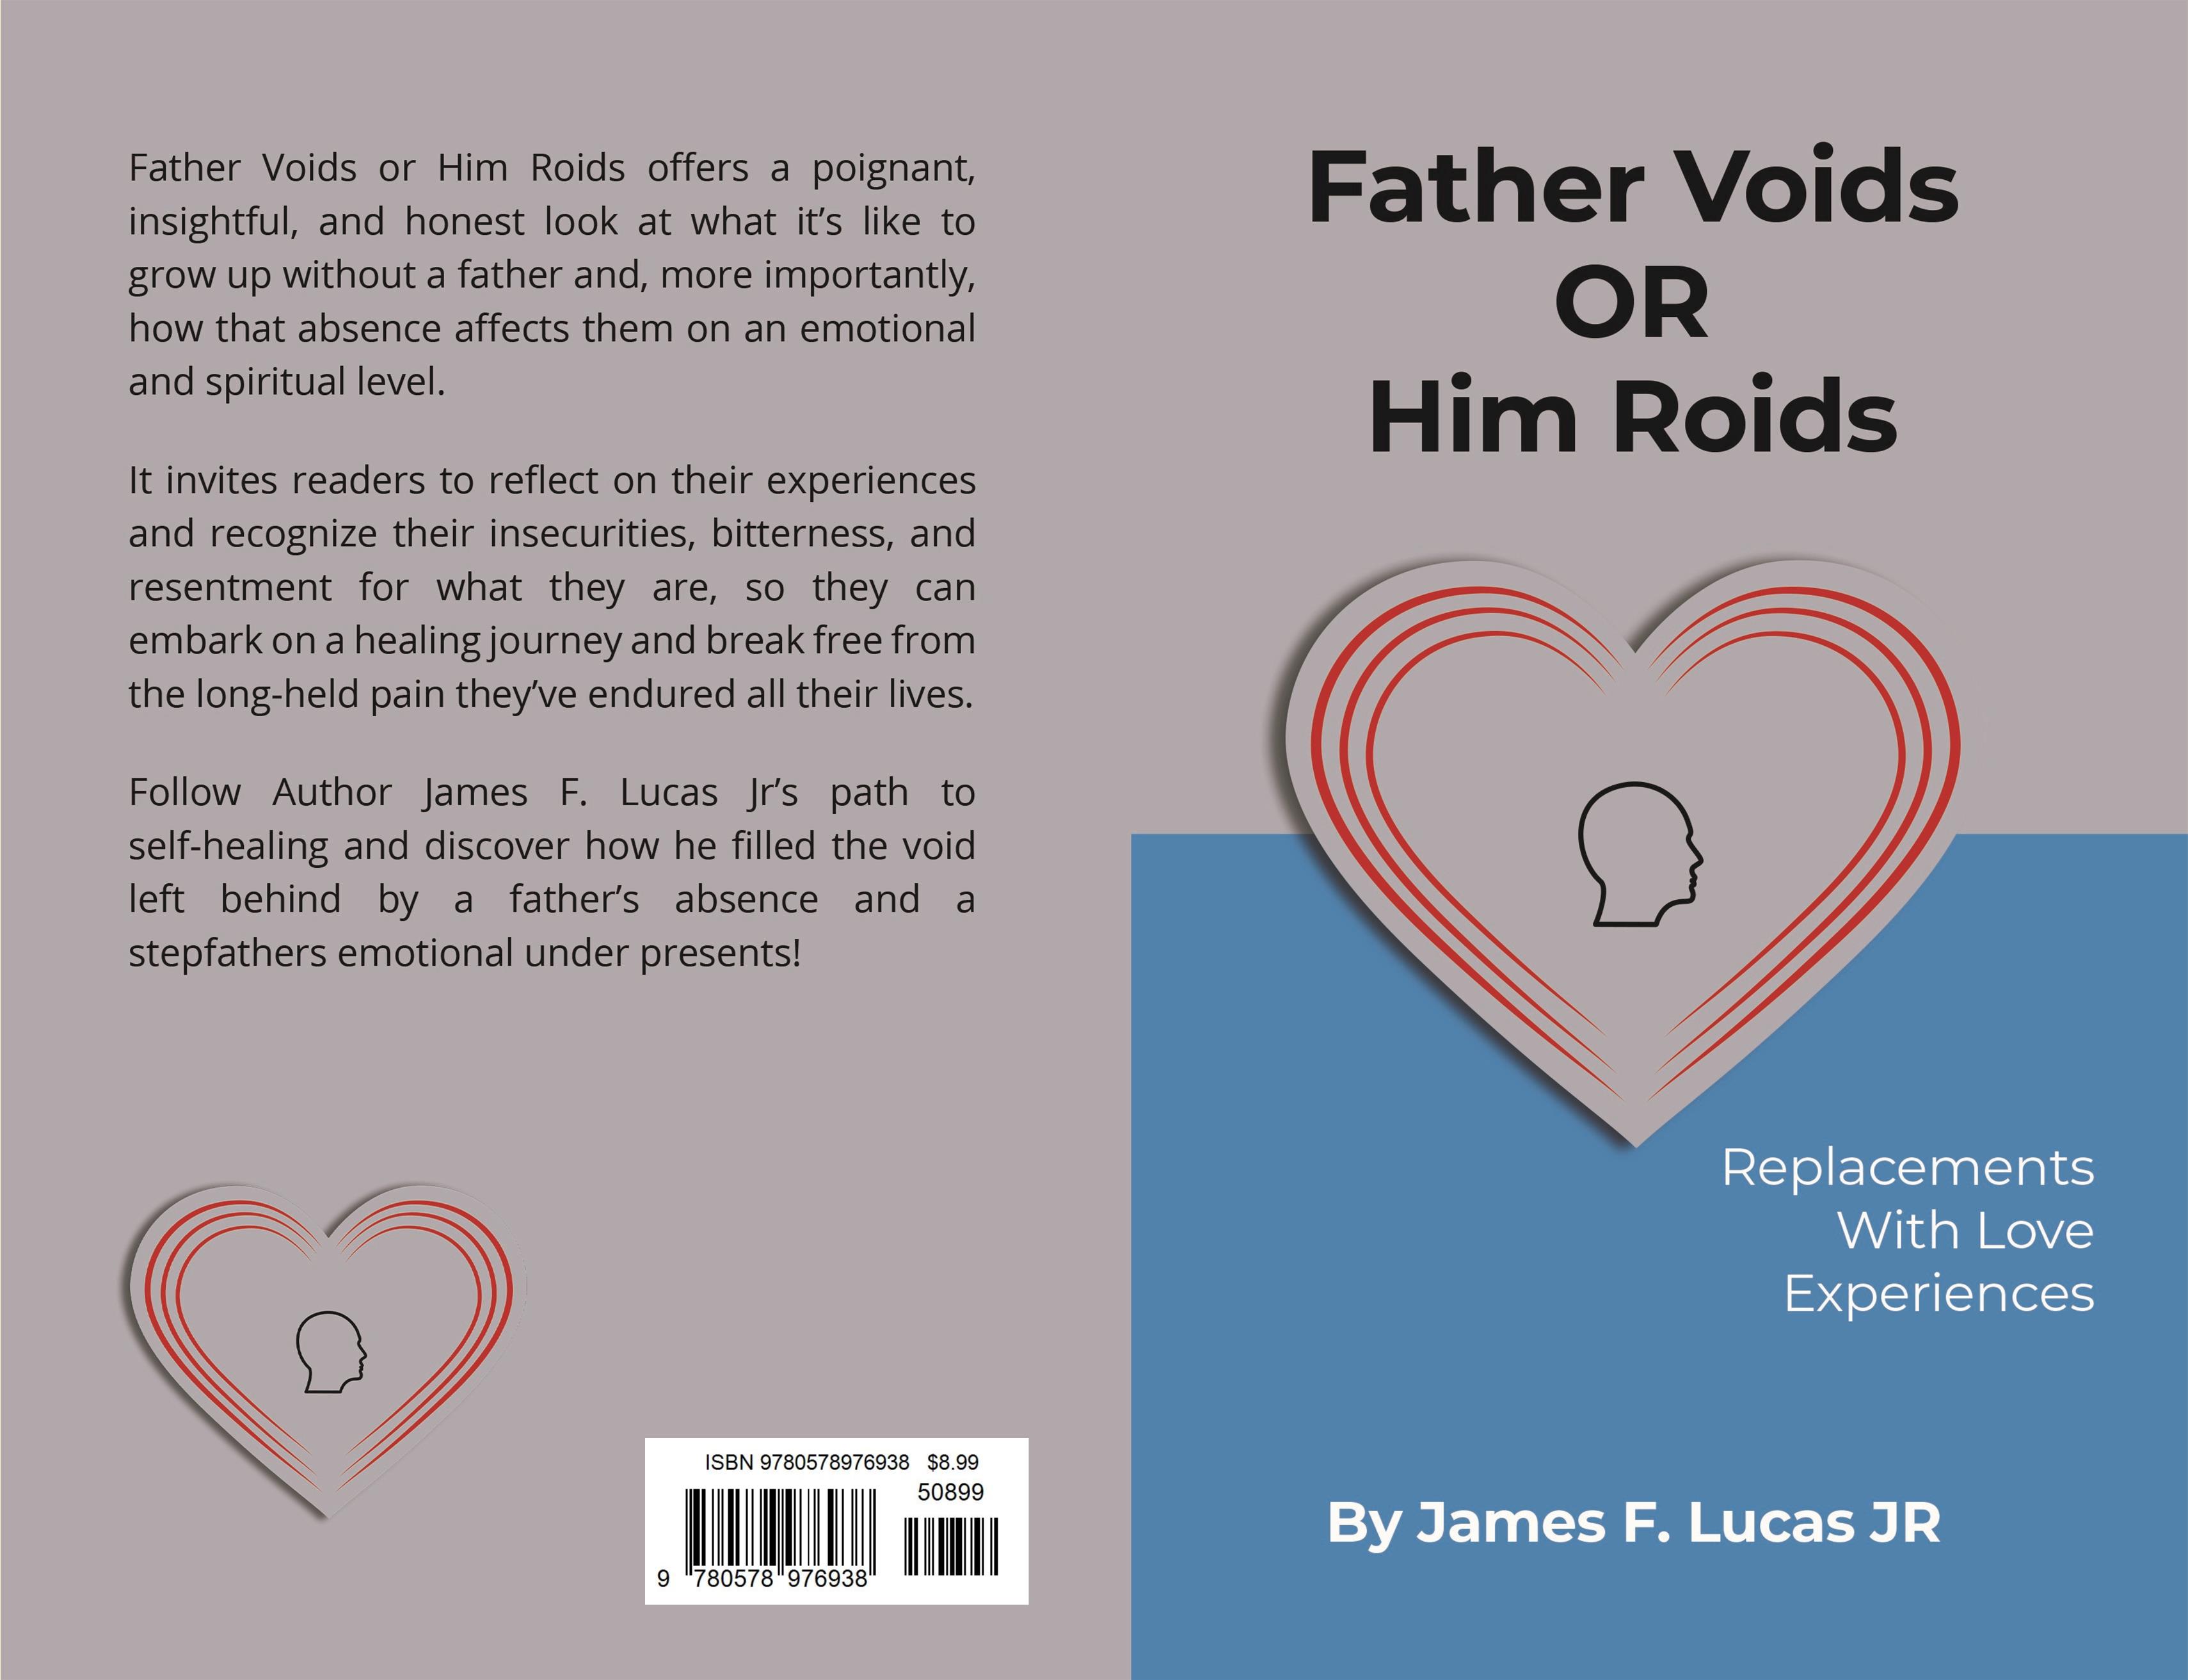 Father Voids or Him Roids Replacements with Love experiences  cover image